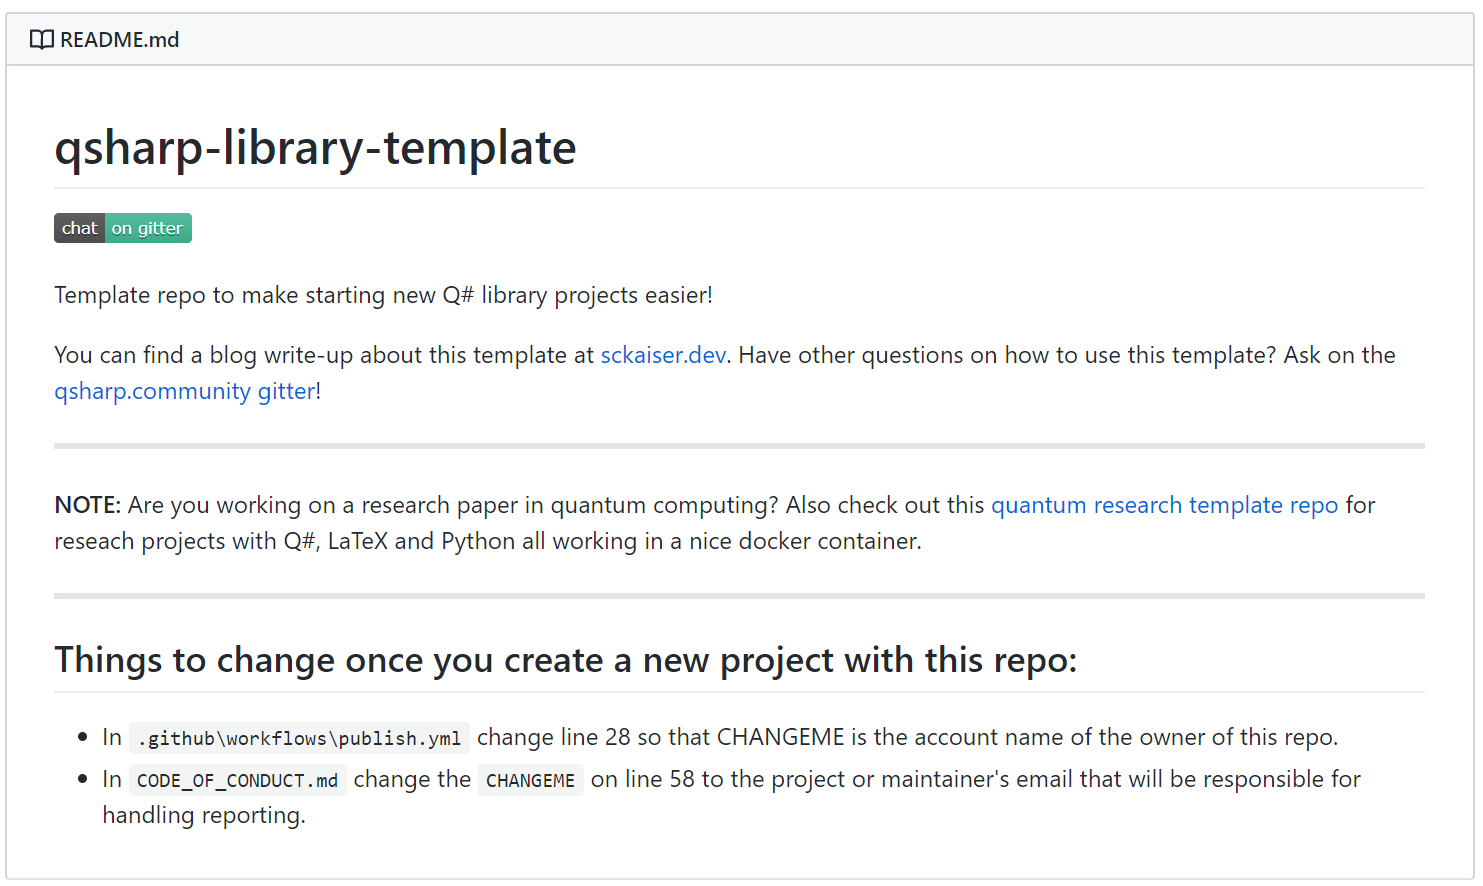 template repo for new q# libraries by yours truly